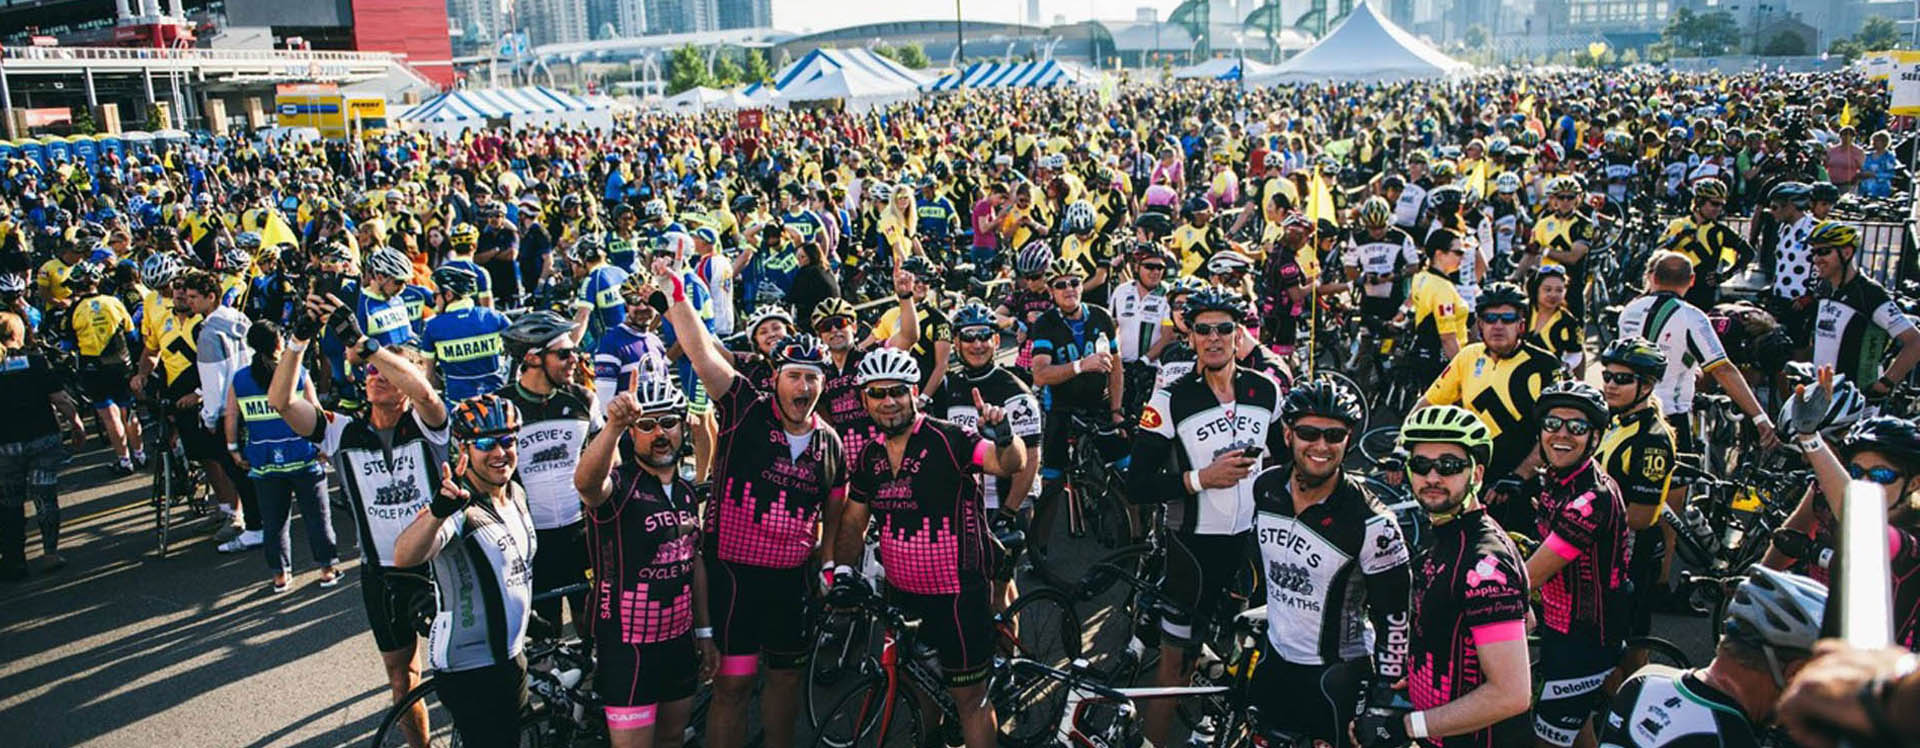 Steve’s Cycle Paths and The Ride to Conquer Cancer benefiting The Princess Margaret Cancer Foundation